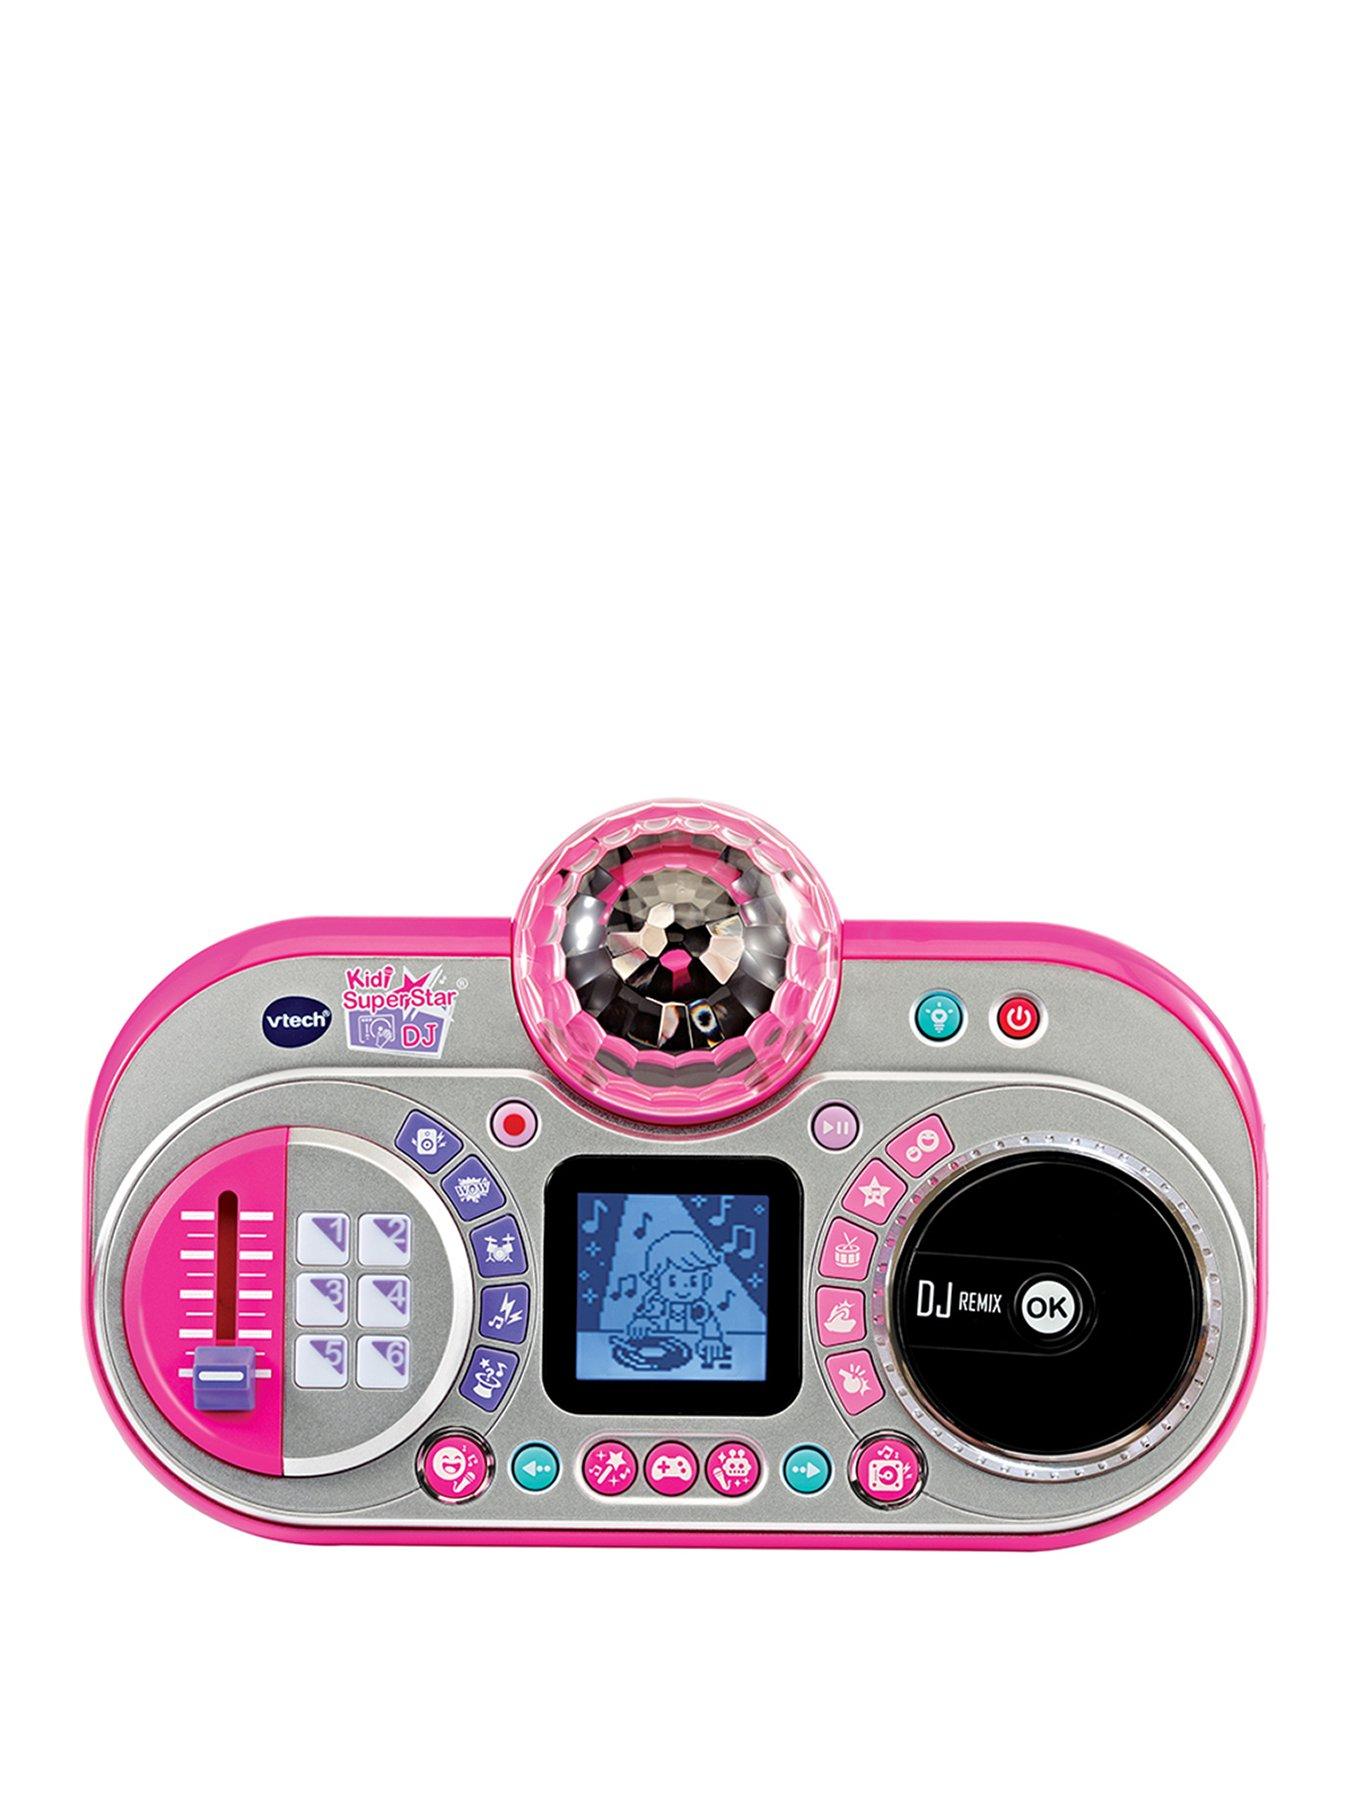 VTech Kidi DJ Mix (Black), Toy DJ Mixer for Kids with 15 Tracks and 4 Music  Styles & VTech Kidi Super Star DJ, Kids Microphone Toy with Songs and